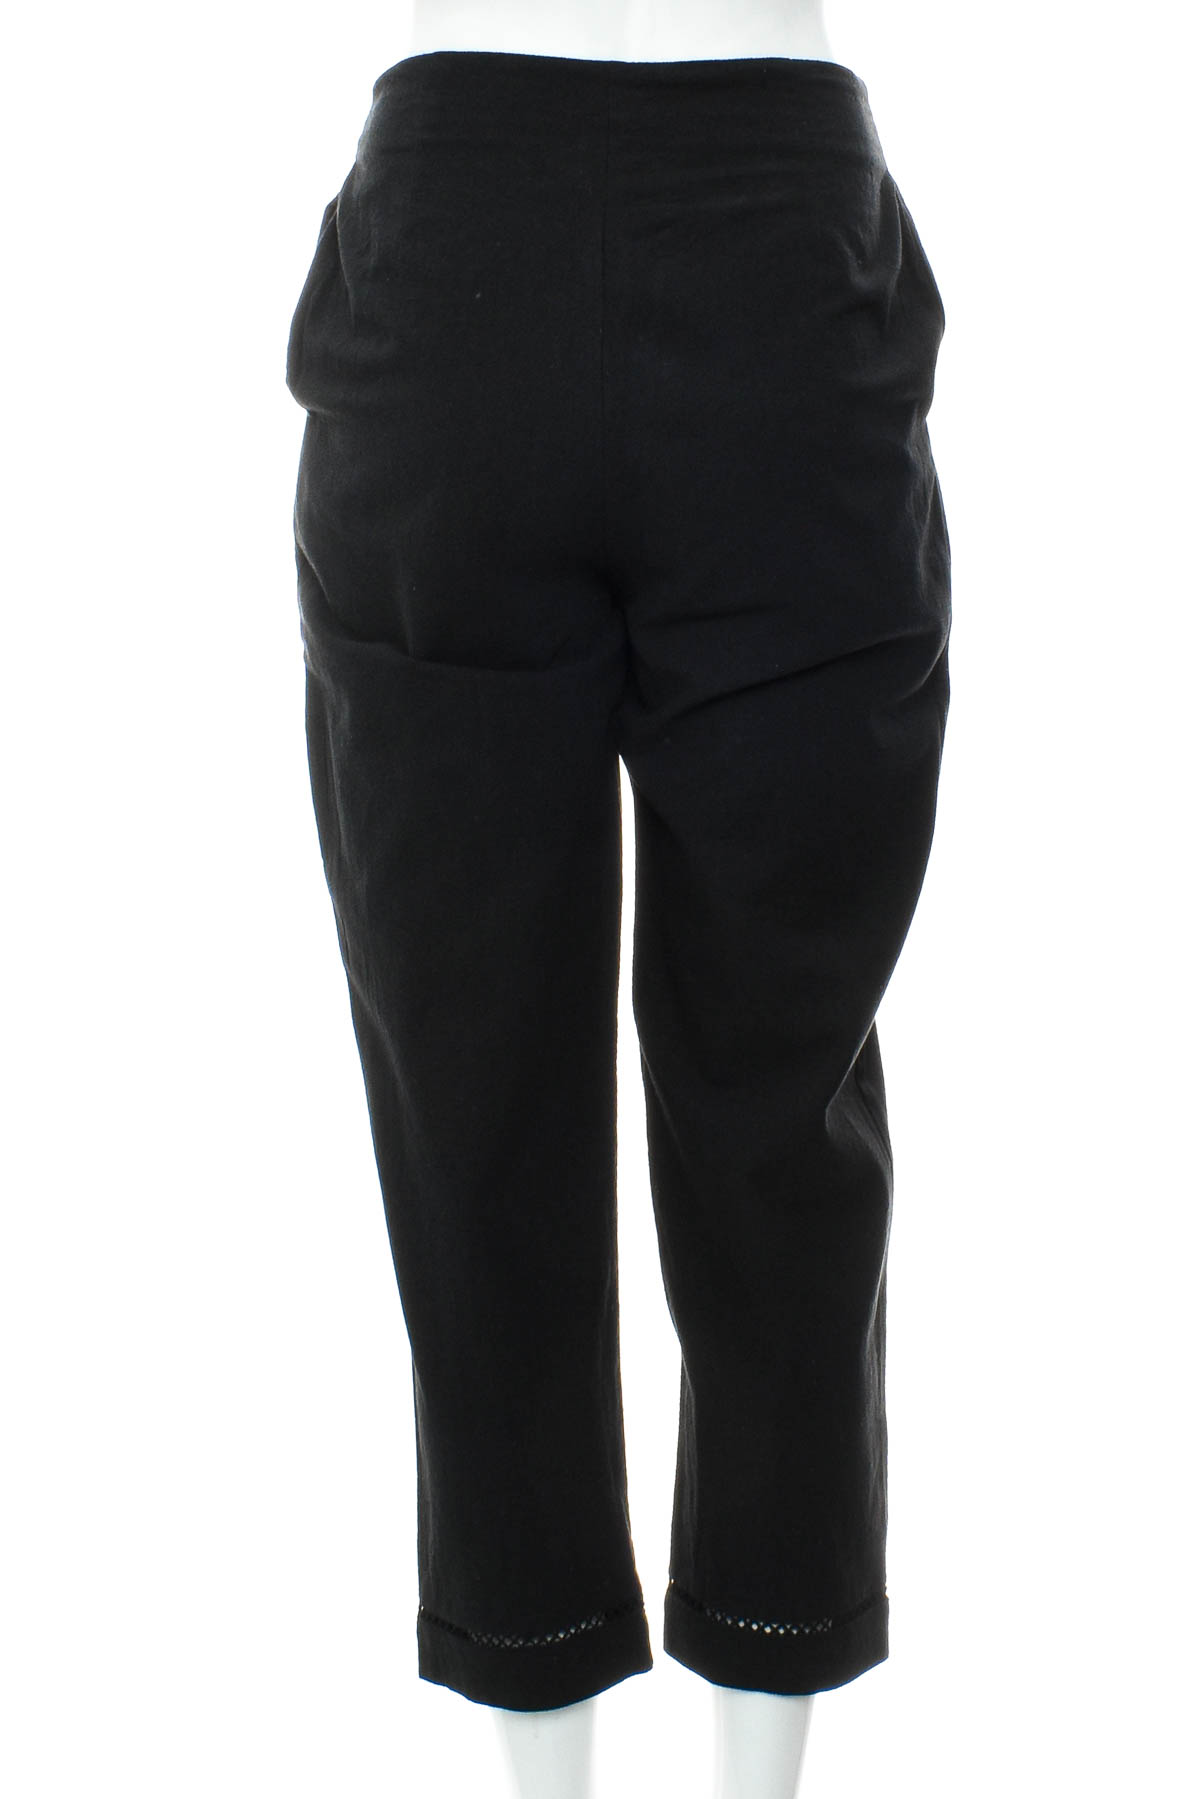 Women's trousers - NORACORA - 1